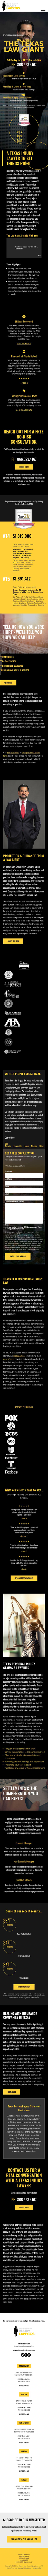 Begum Law Group - Brownsville TX Lawyers